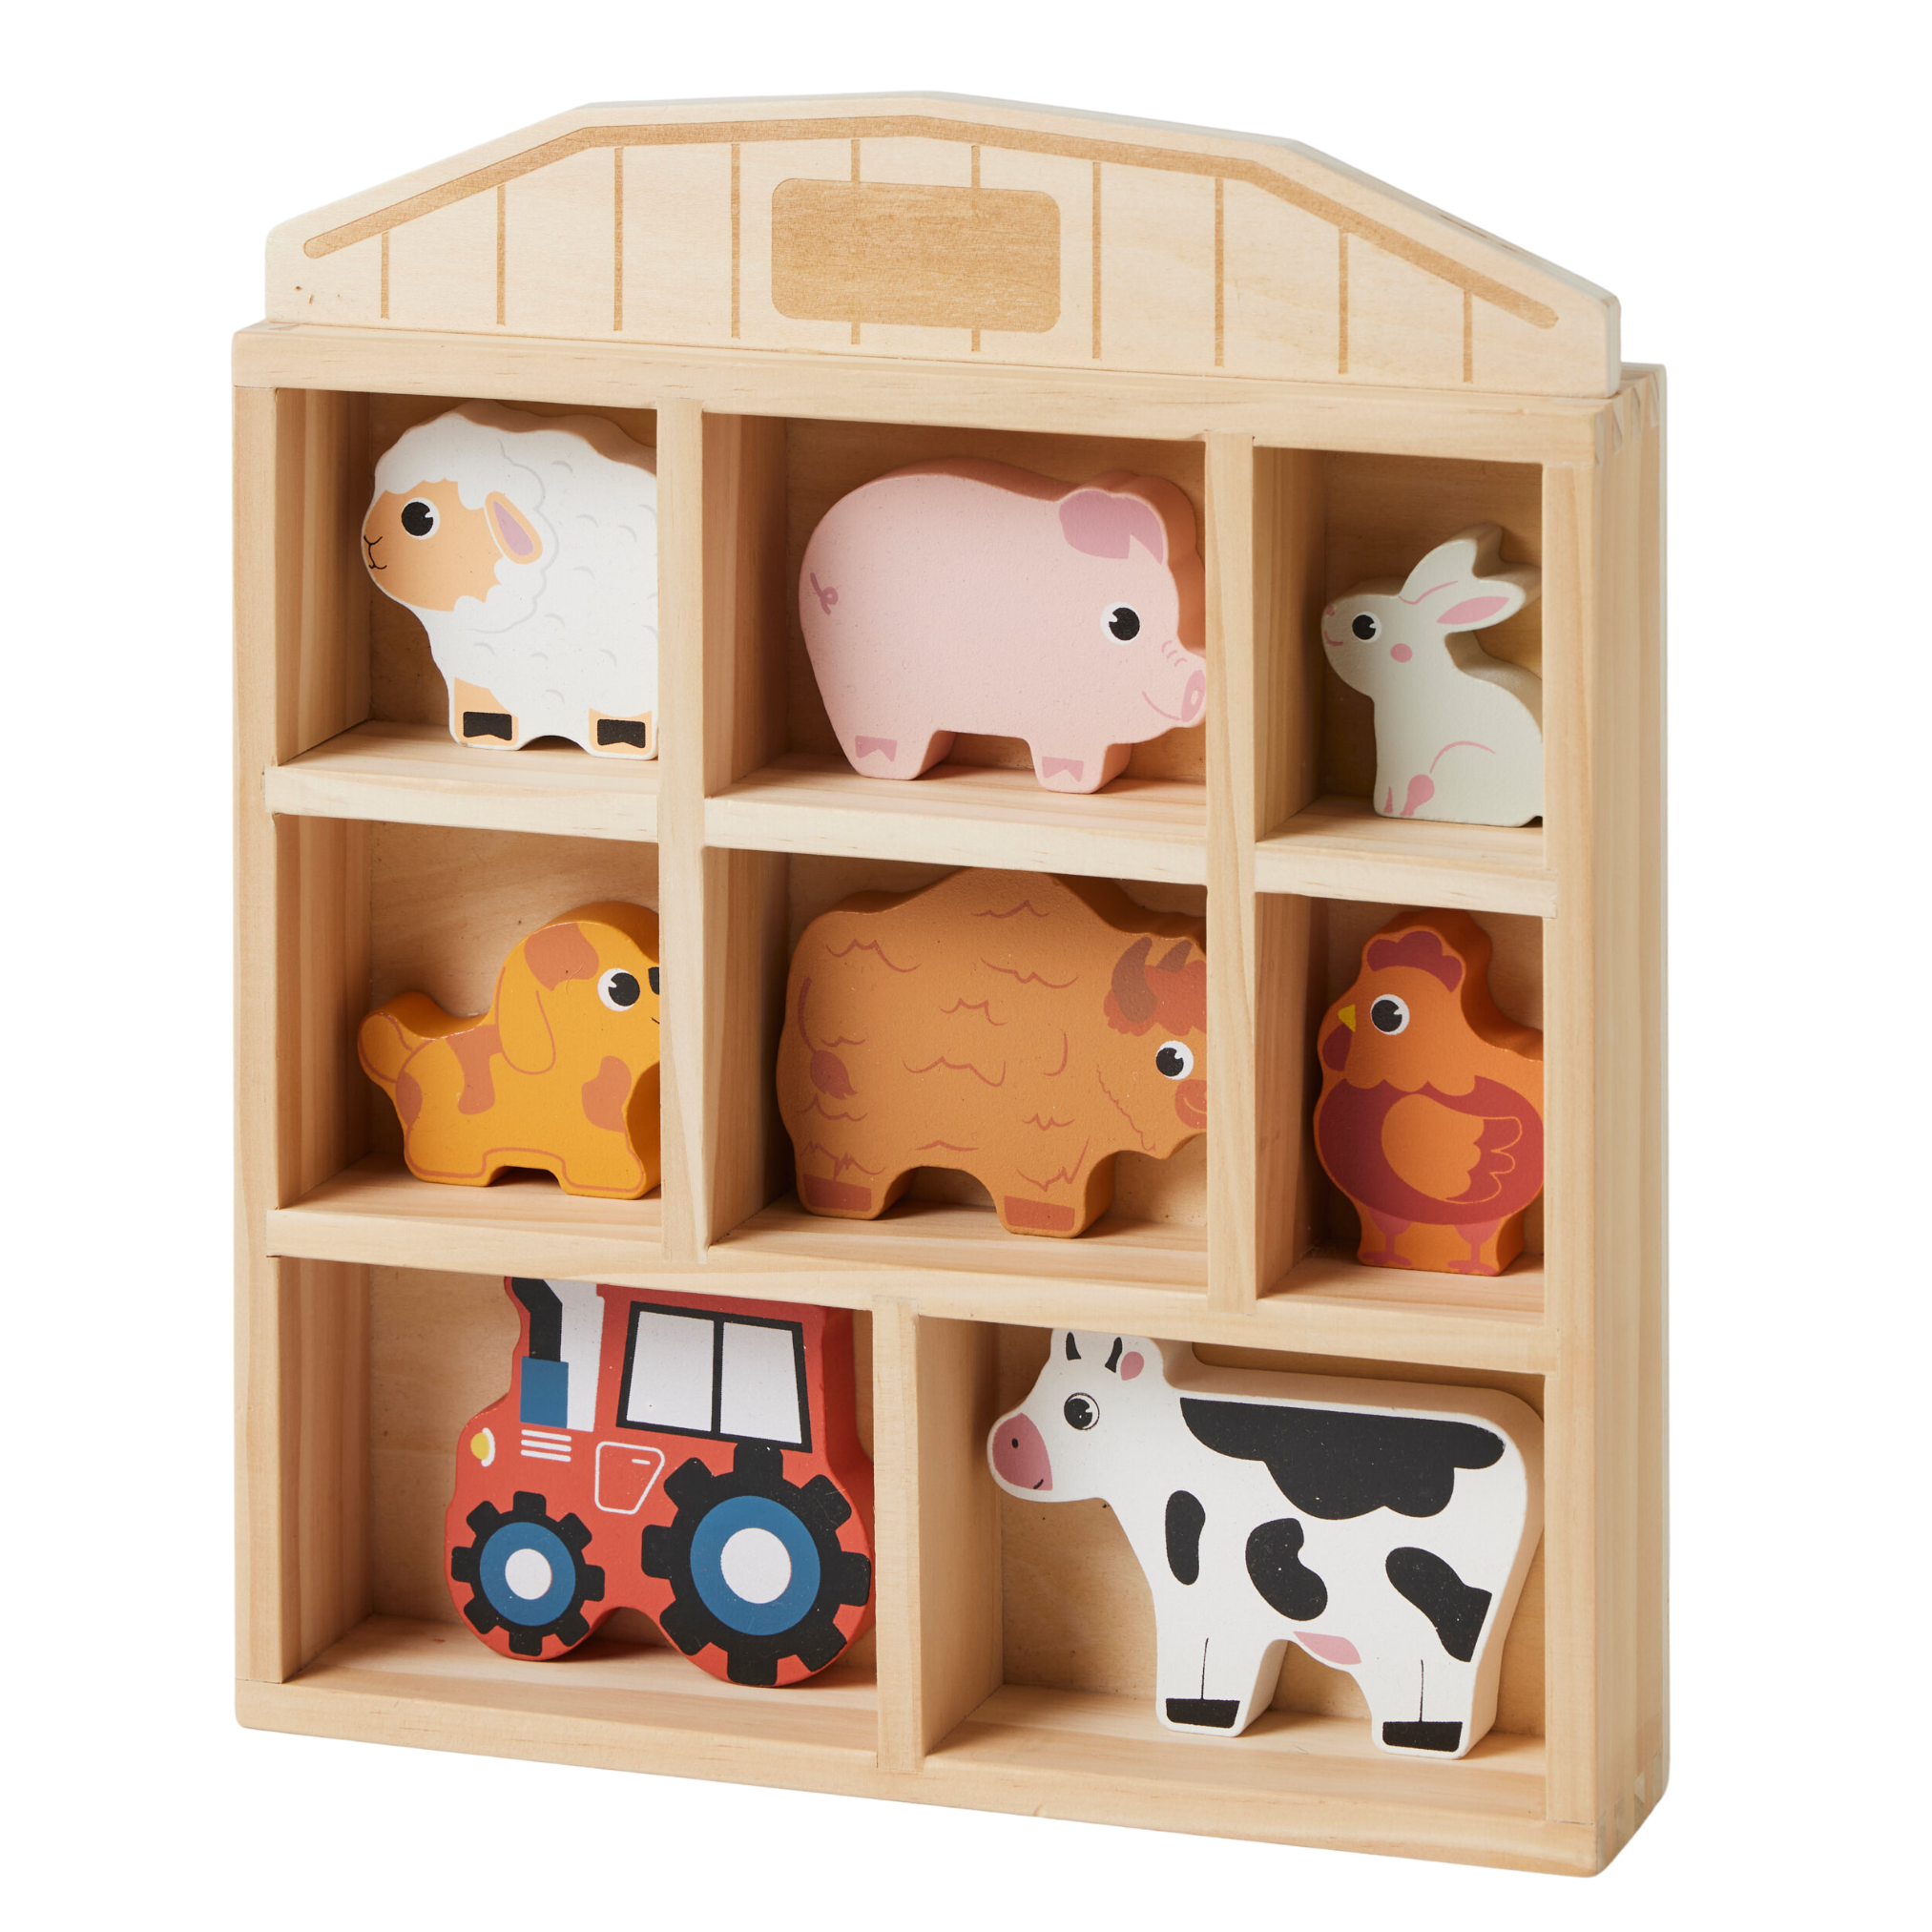 Wooden farm animal figures and red wooden tractor piece in a wooden farm shaped storage shelf.